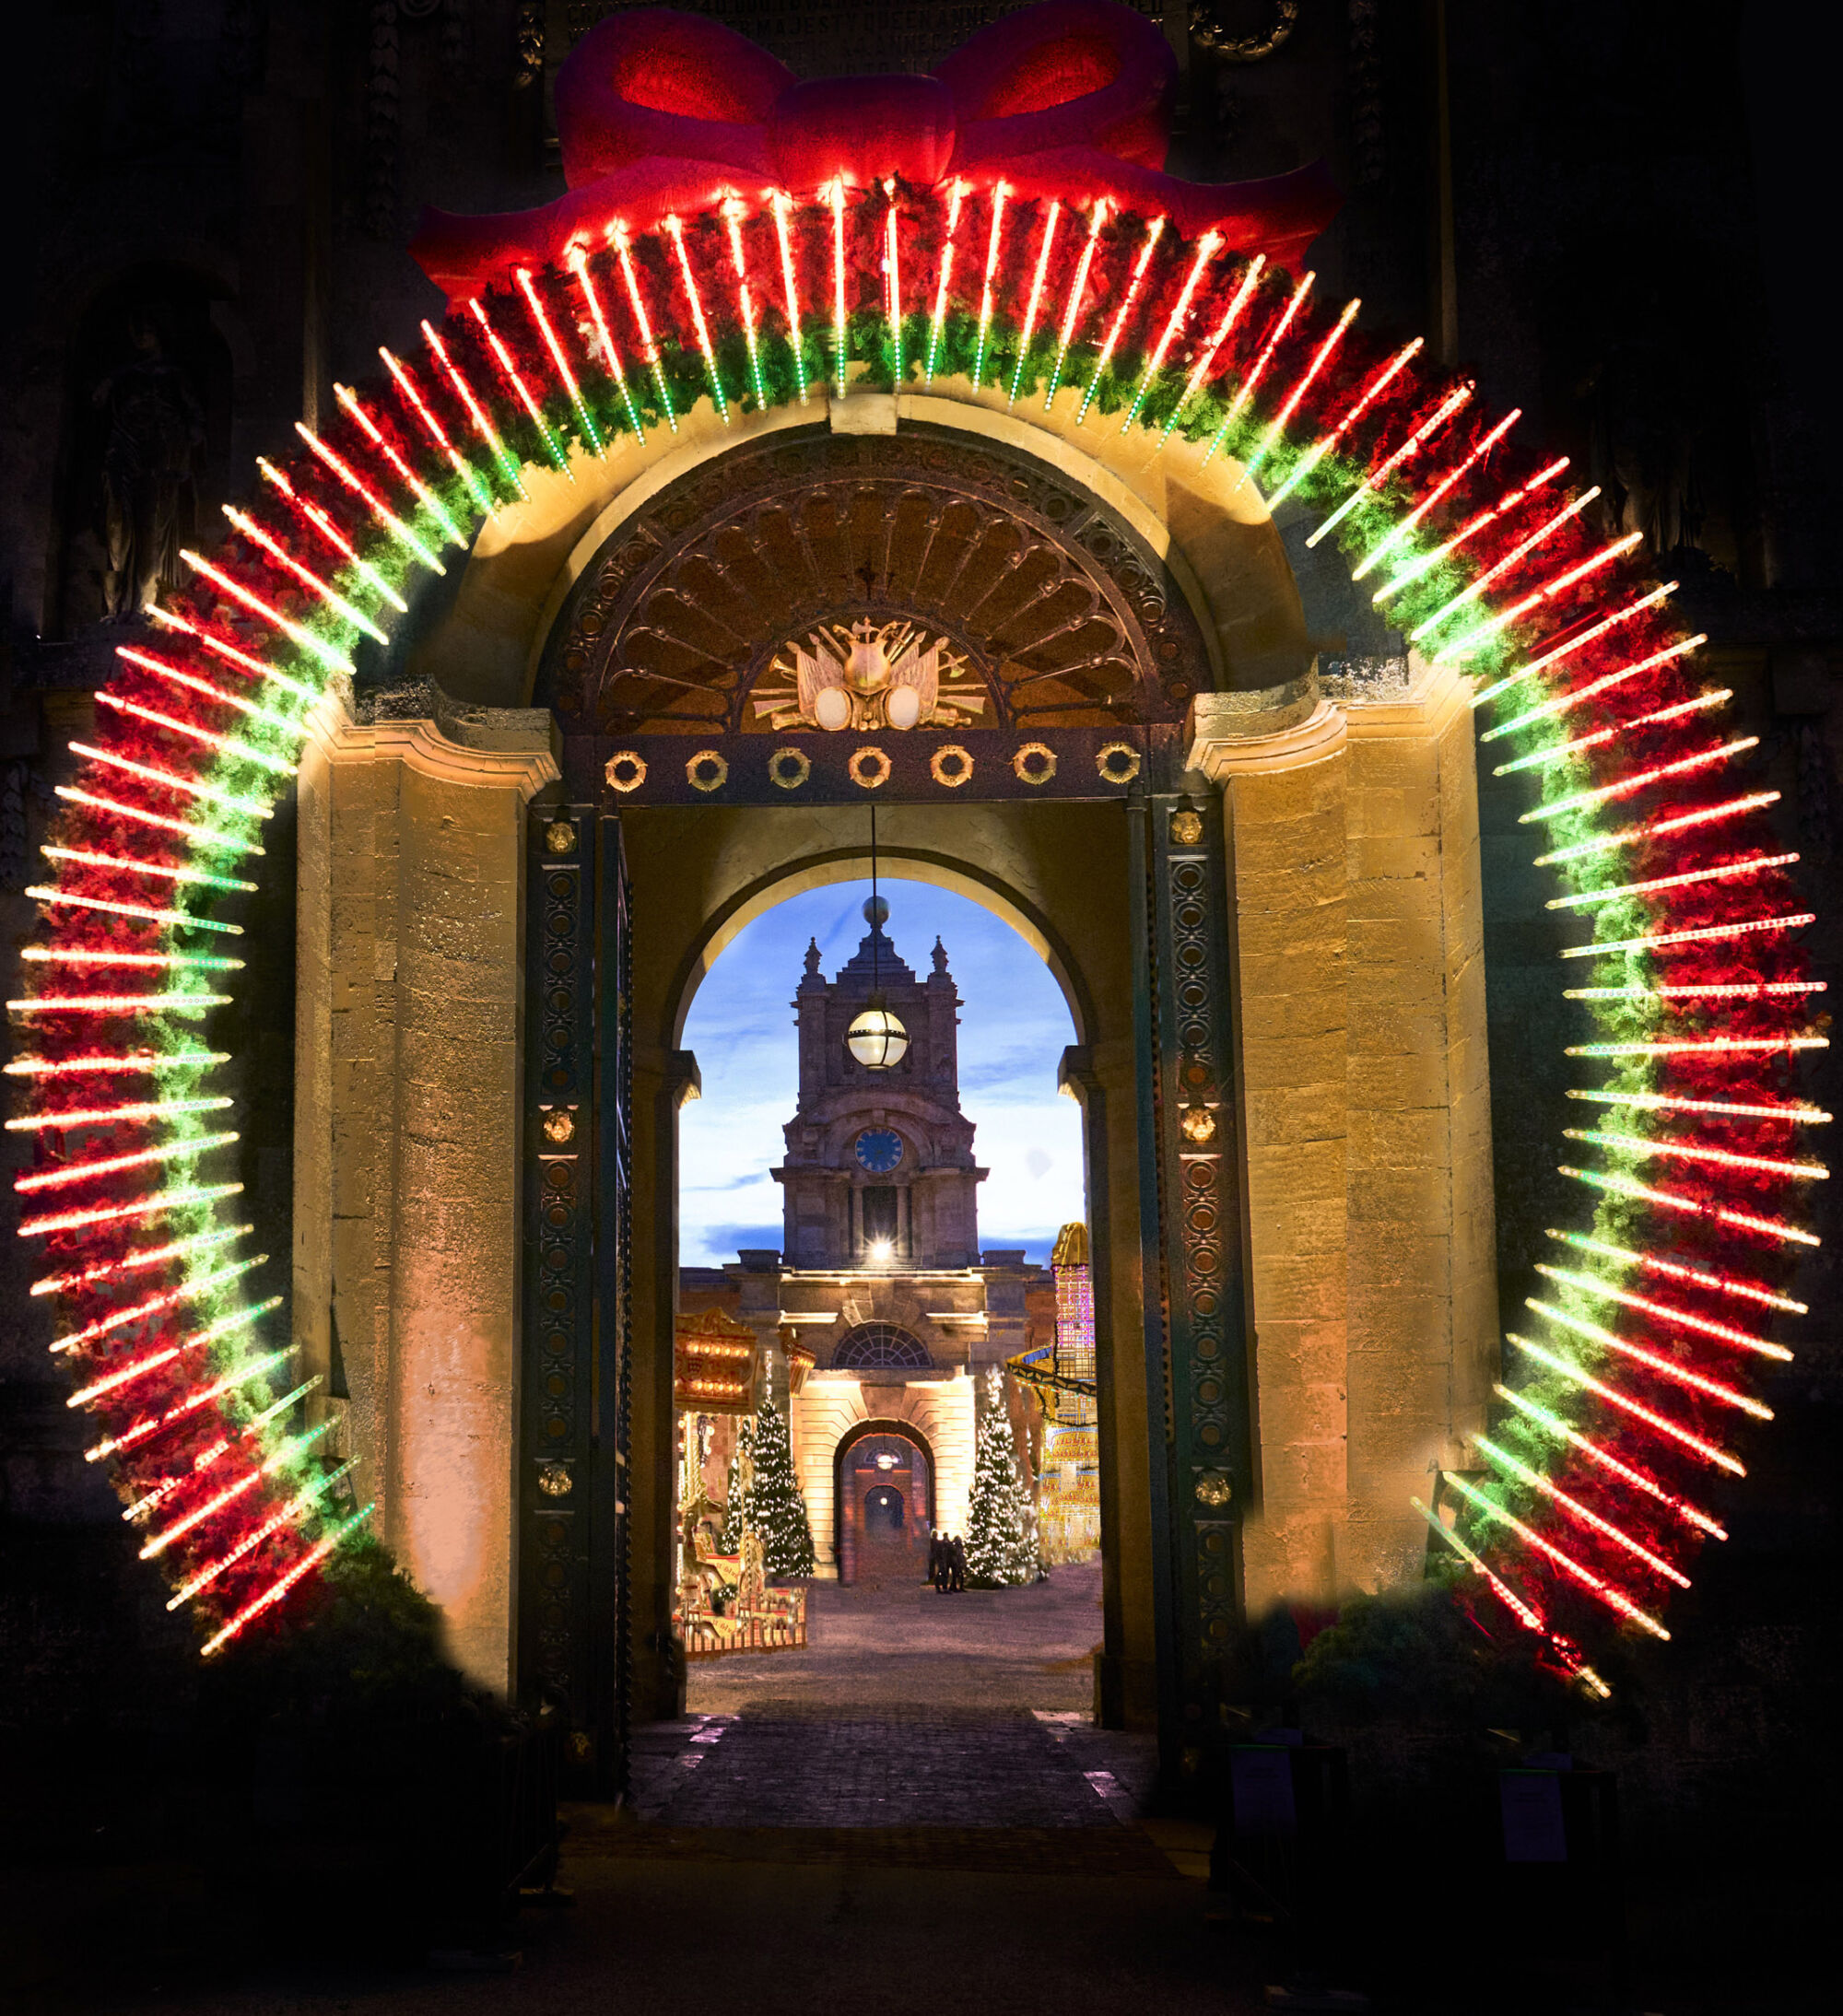 The Wick - Wreath Archway at Christmas at Blenheim Palace Photo by Richard Haughton © Sony Music